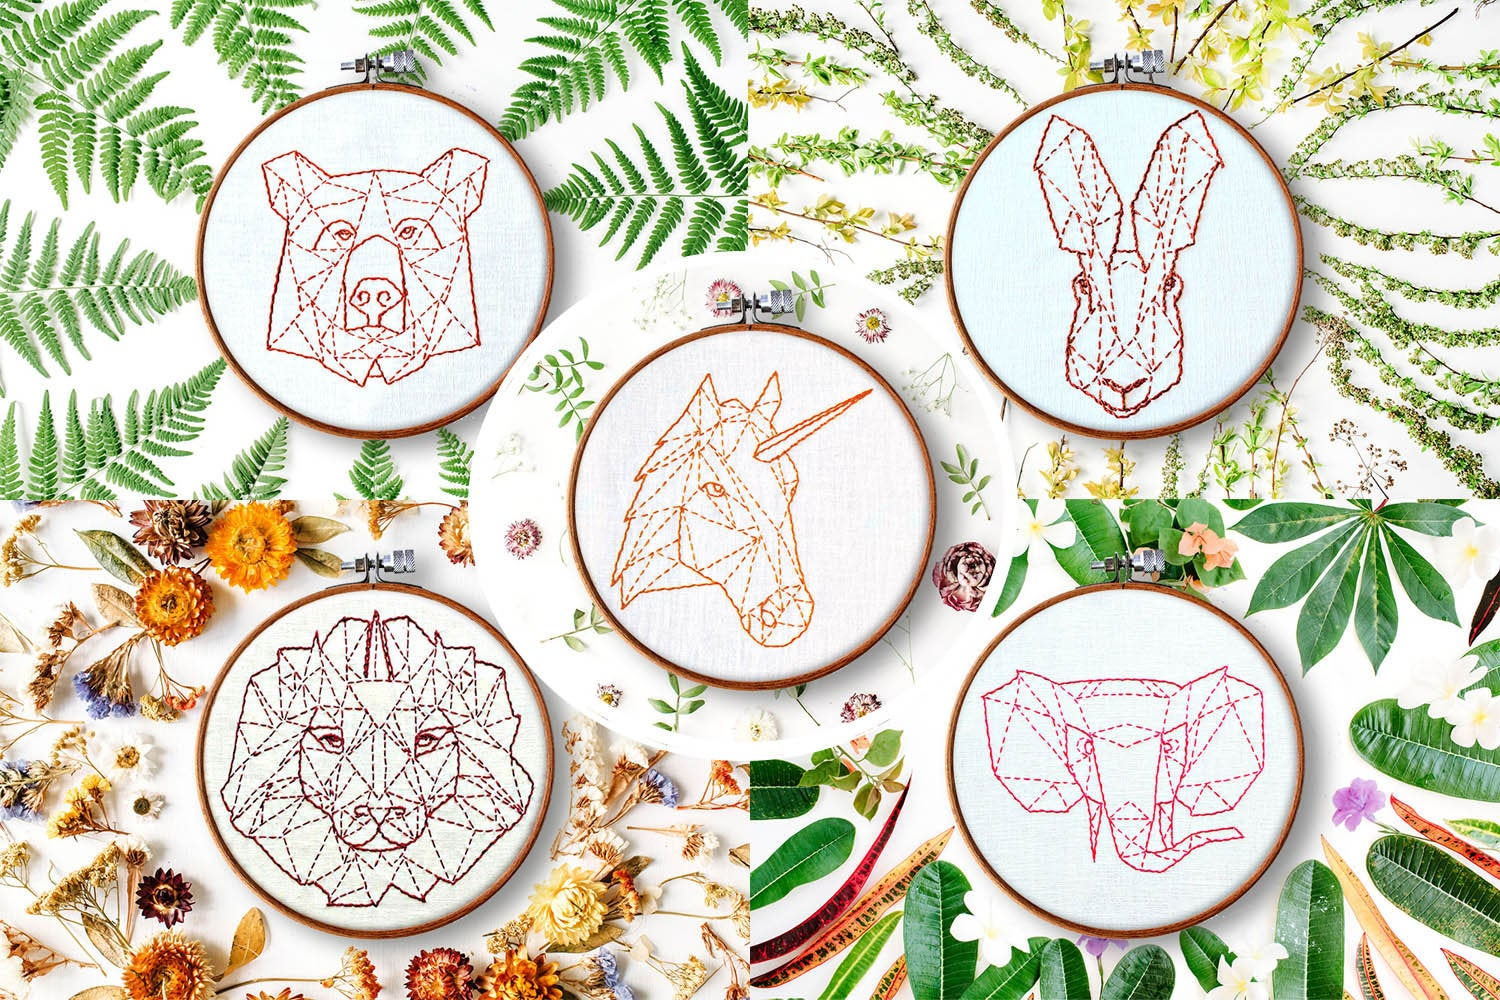 Geometric Embroidery Patterns Modern Hand Embroidery Patterns Geometric Animals Beginner Embroidery Embroidery Ideas Contemporary Embroidery Rustic Home Decor